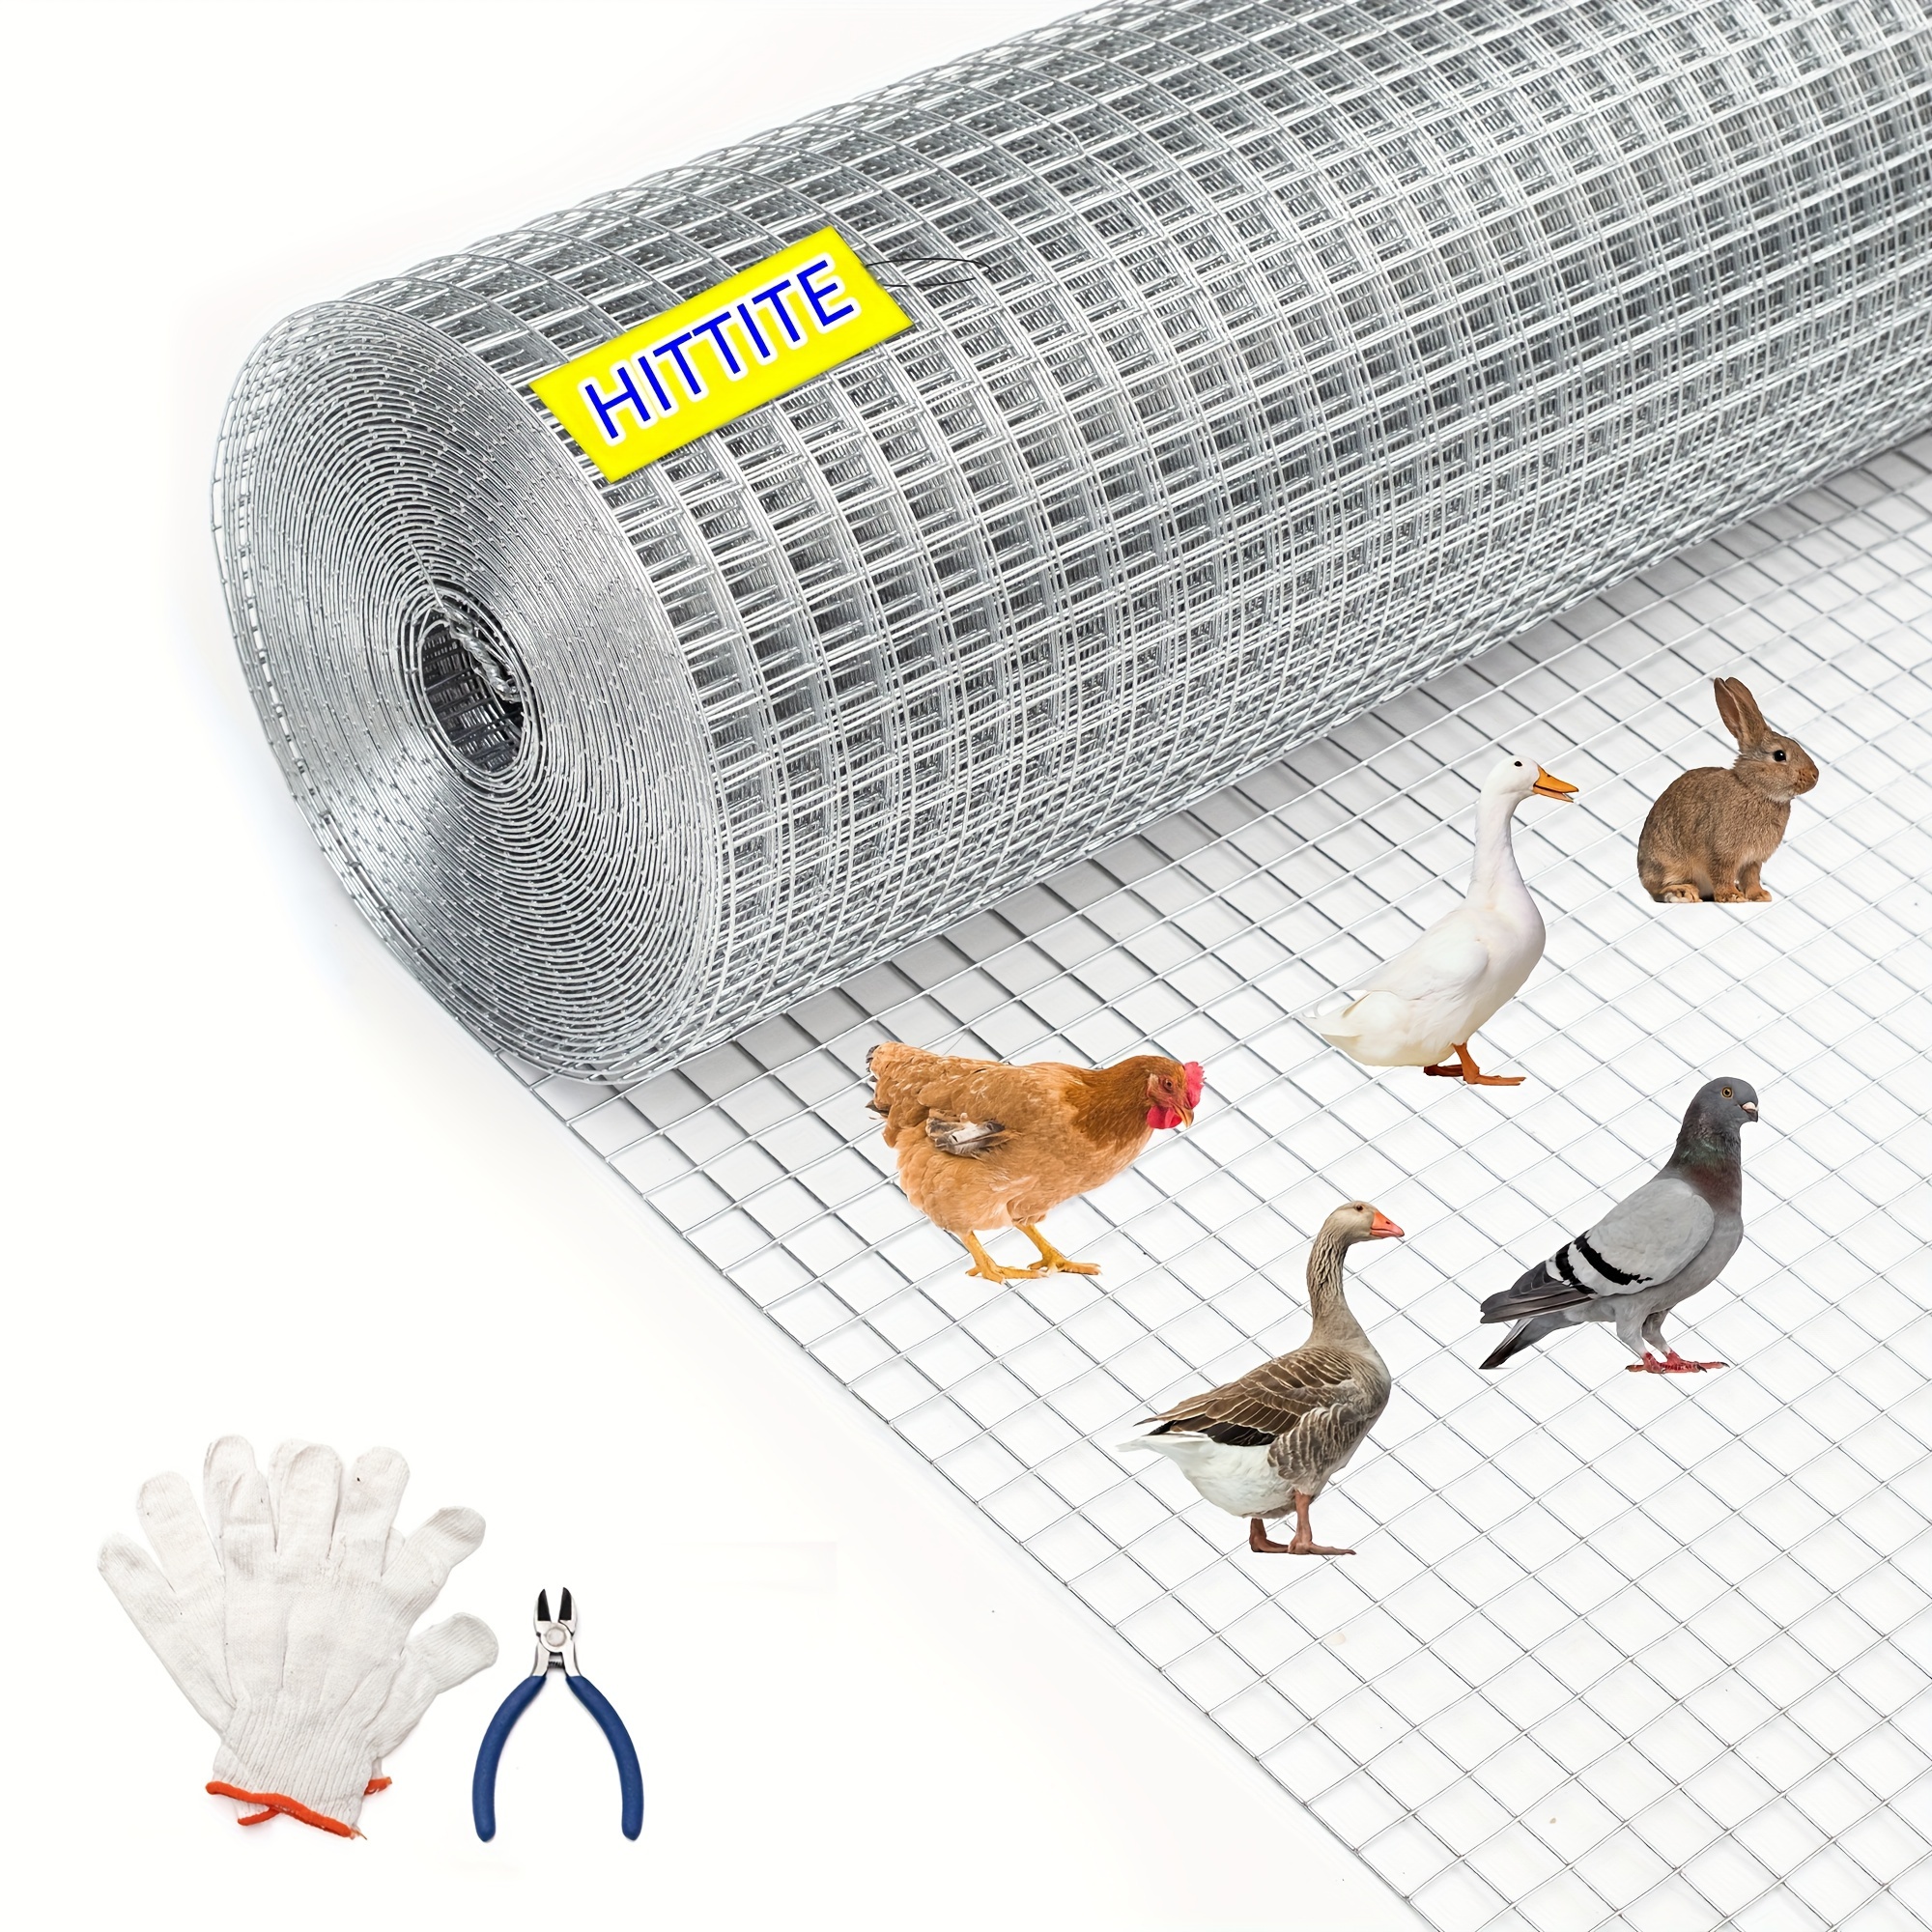 

Hittite Hardware Cloth 1/2 Inch, Hot-dip Galvanized After Welding Chicken Wire Mesh, 19 Gauge Welded Chicken Wire Fencing For Chicken Coop And Home Improvement Projects